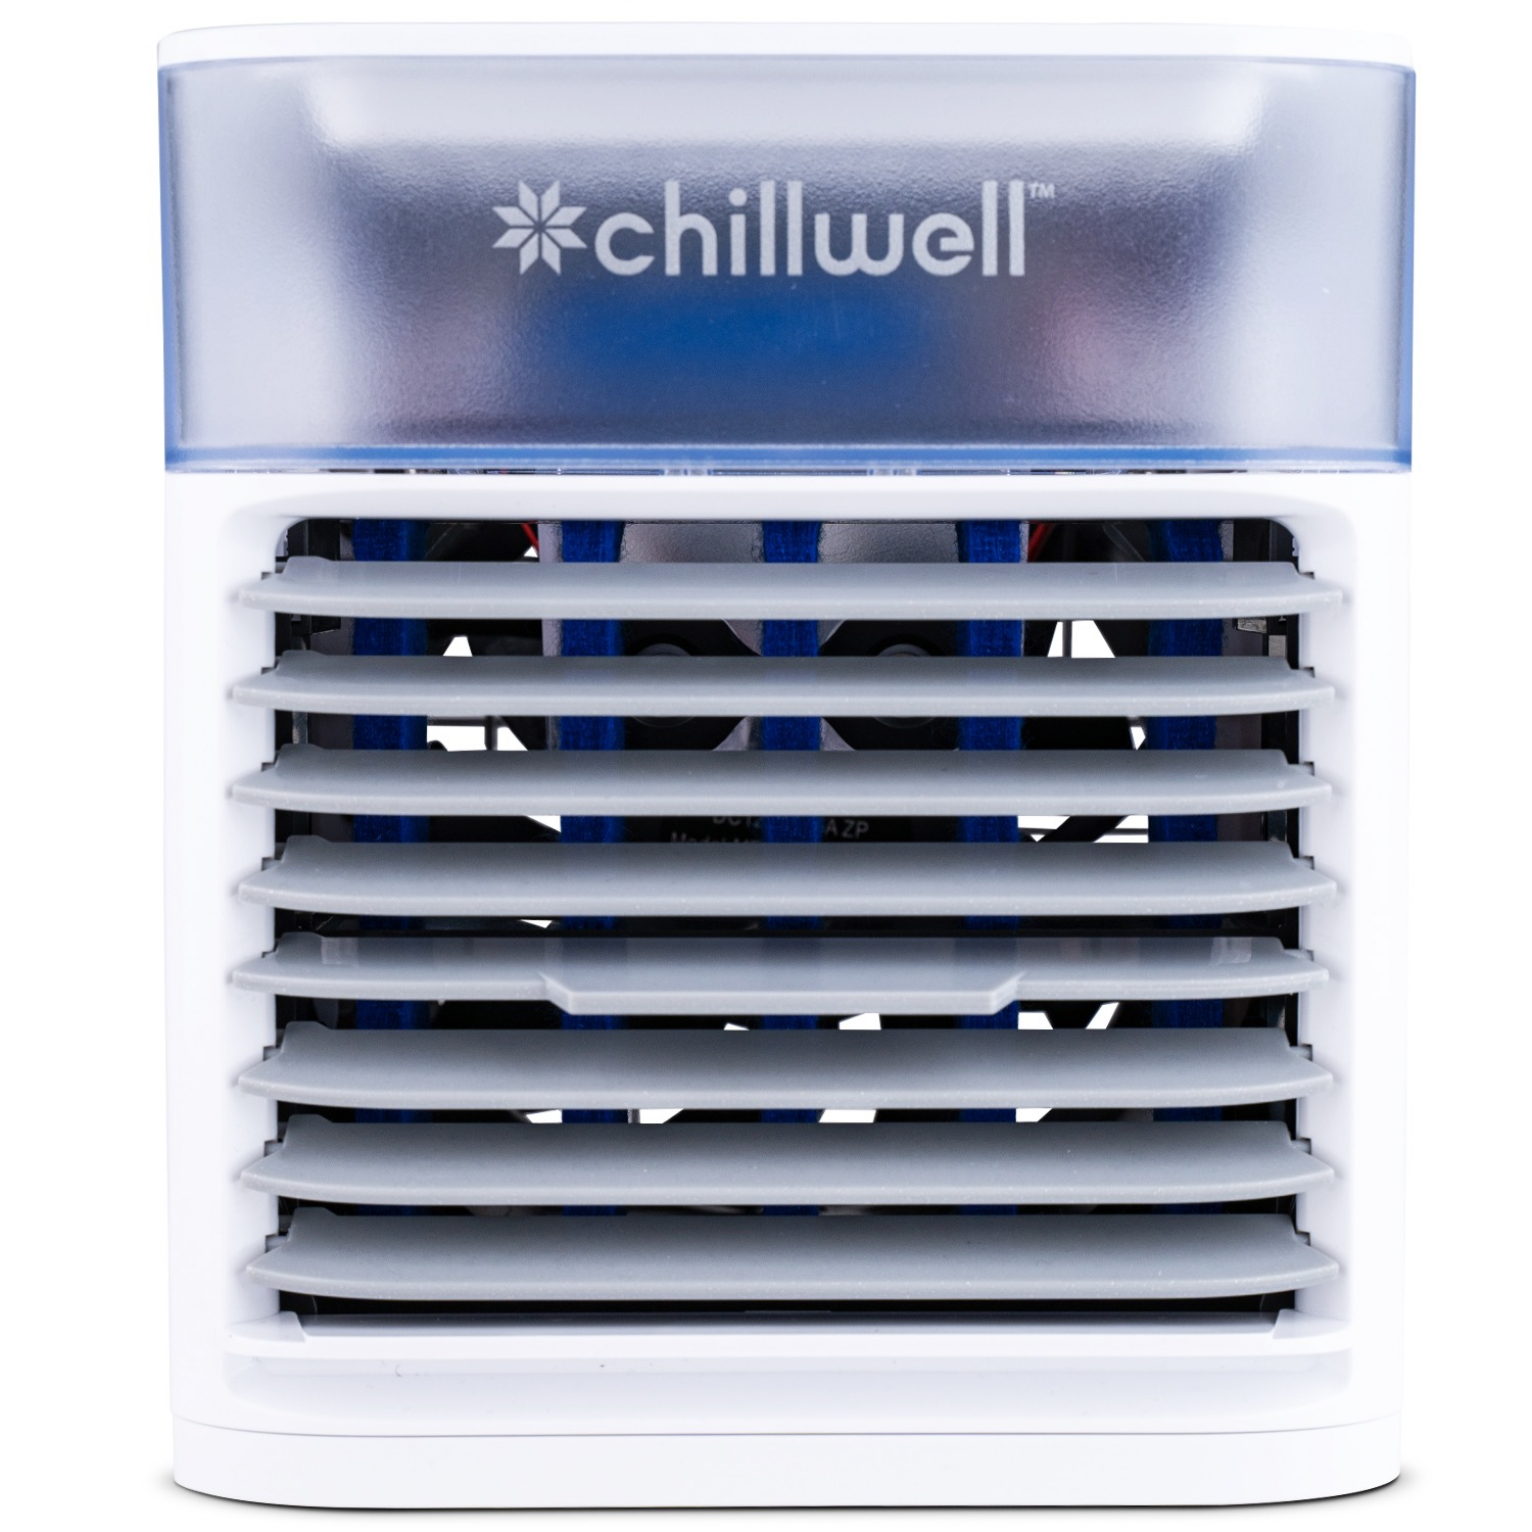 Negative Reviews About Chillwell AC